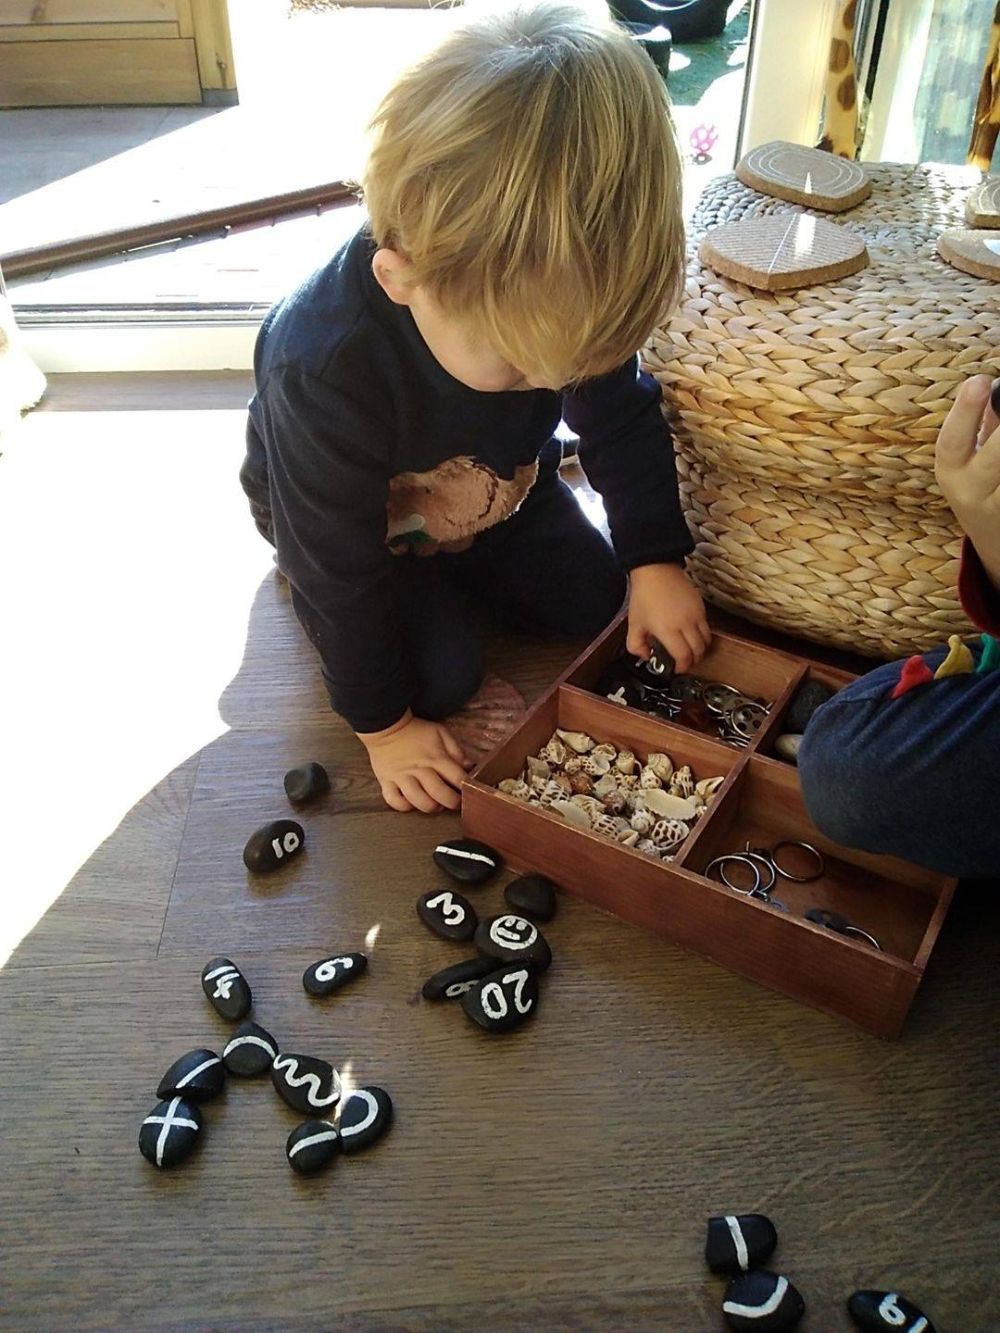 Early maths skills being developed in our preschool